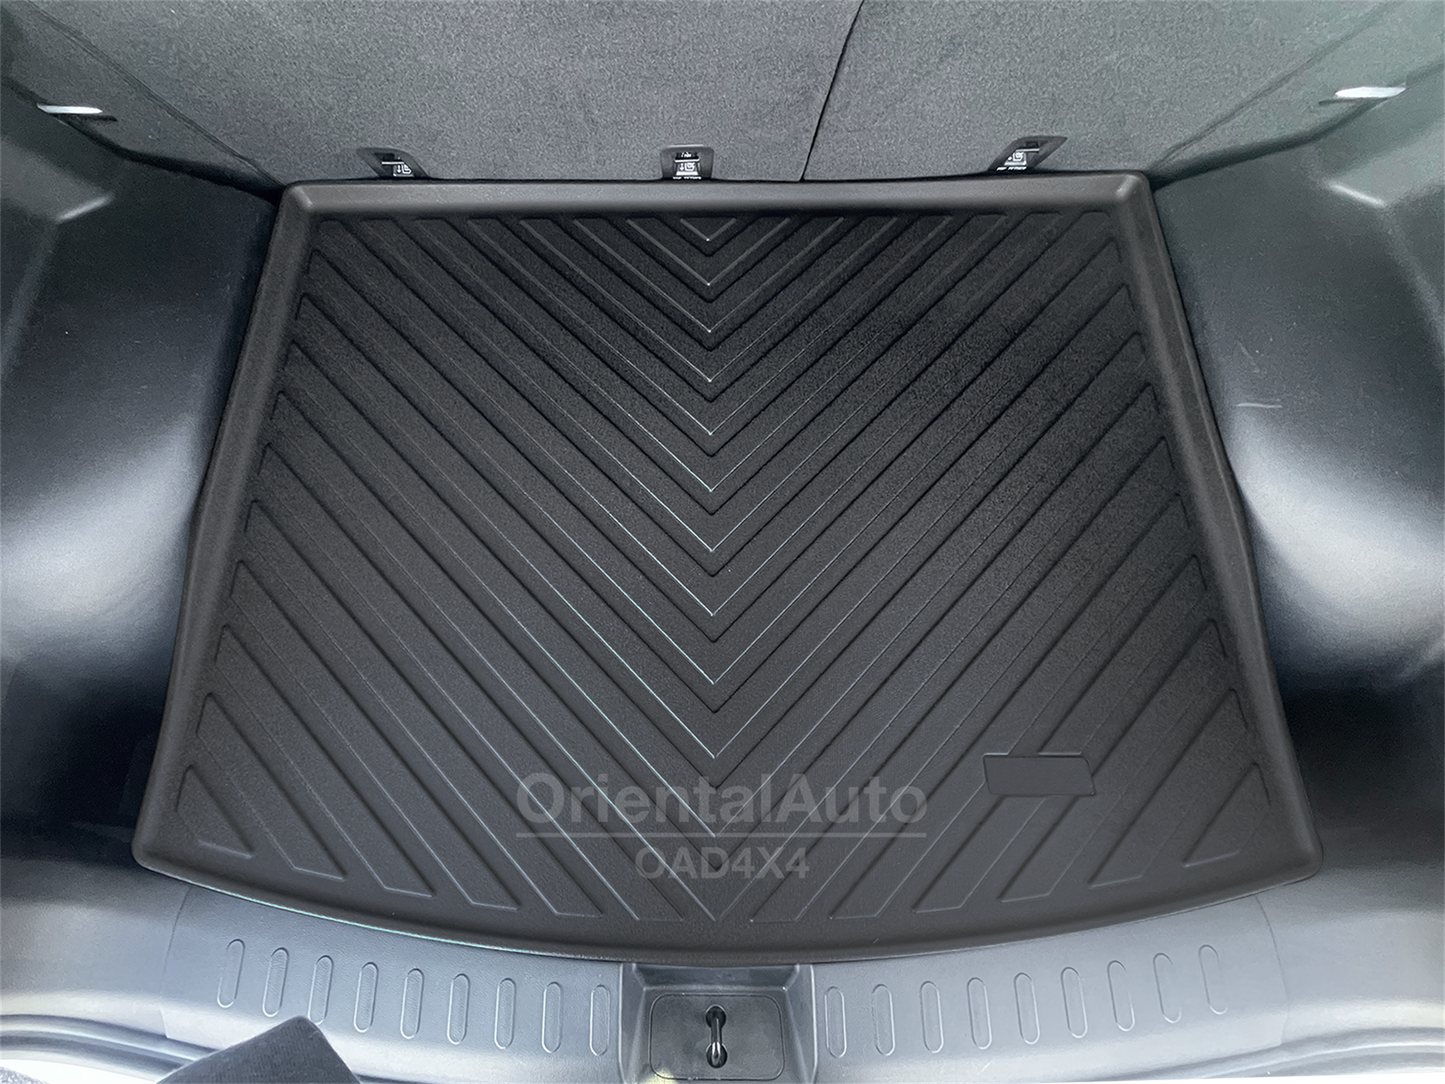 Injection Stainless Weathershields & 3D TPE Cargo Mat For Haval Jolion Hybrid 2021-Onwards Weather shields Window Visors + Cargo Mat Trunk Mat Boot Liner